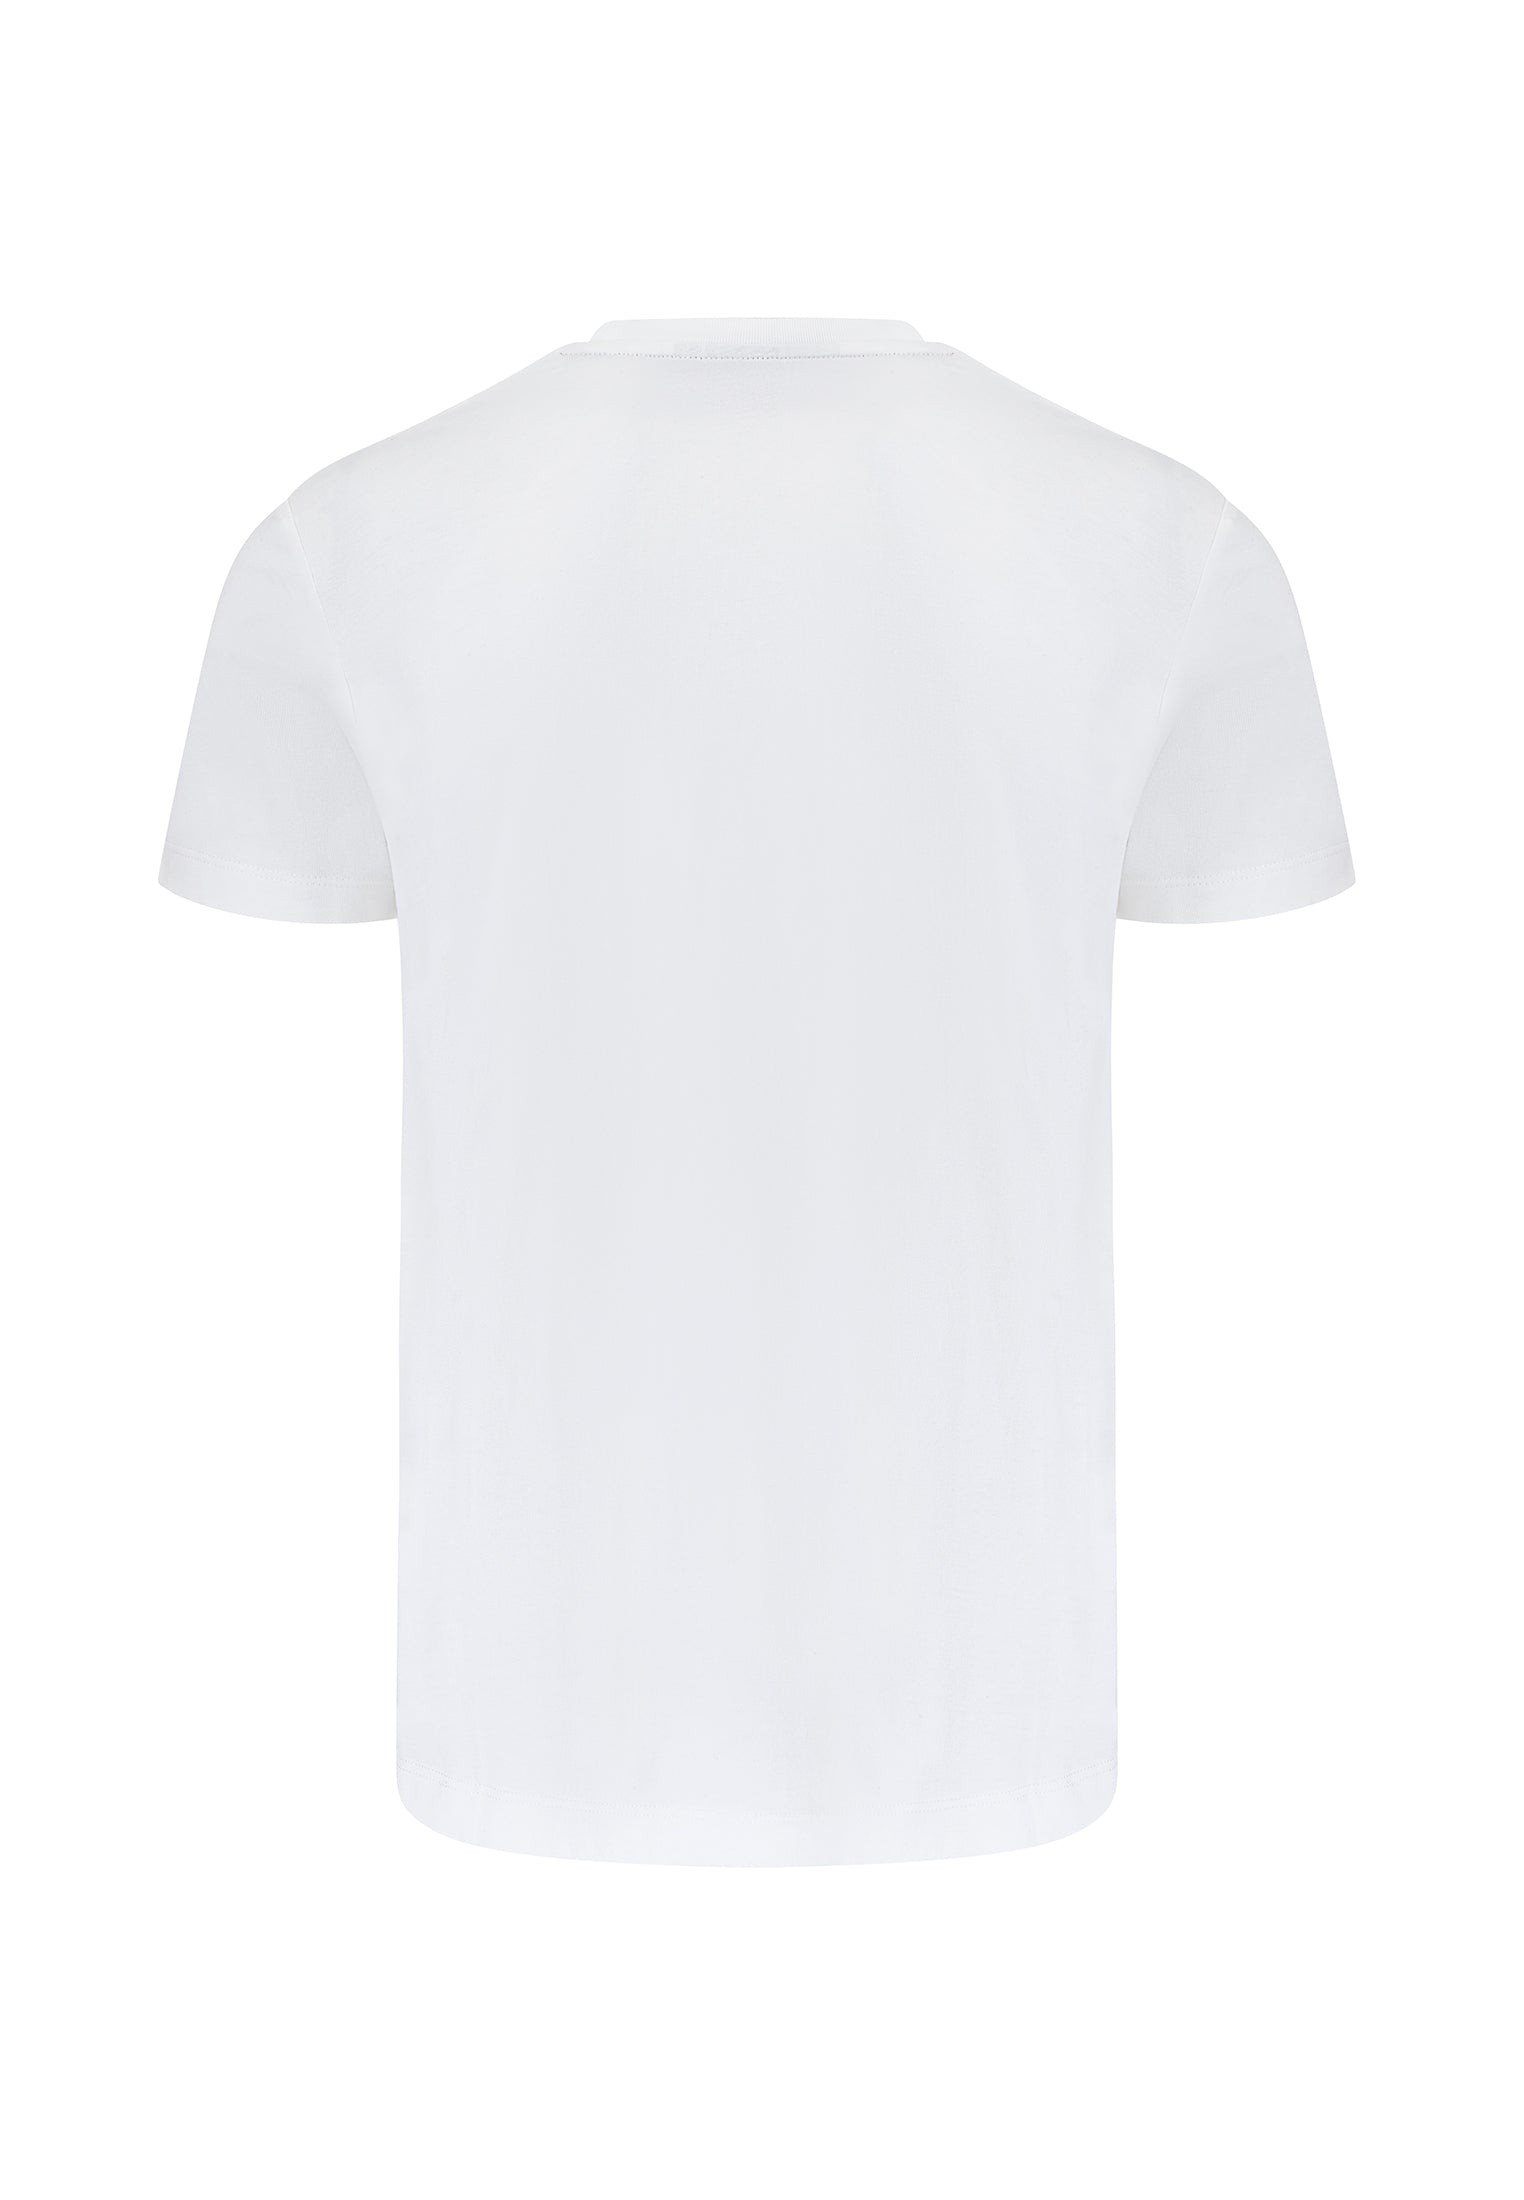 Printed Mens T-Shirt by Merc in White